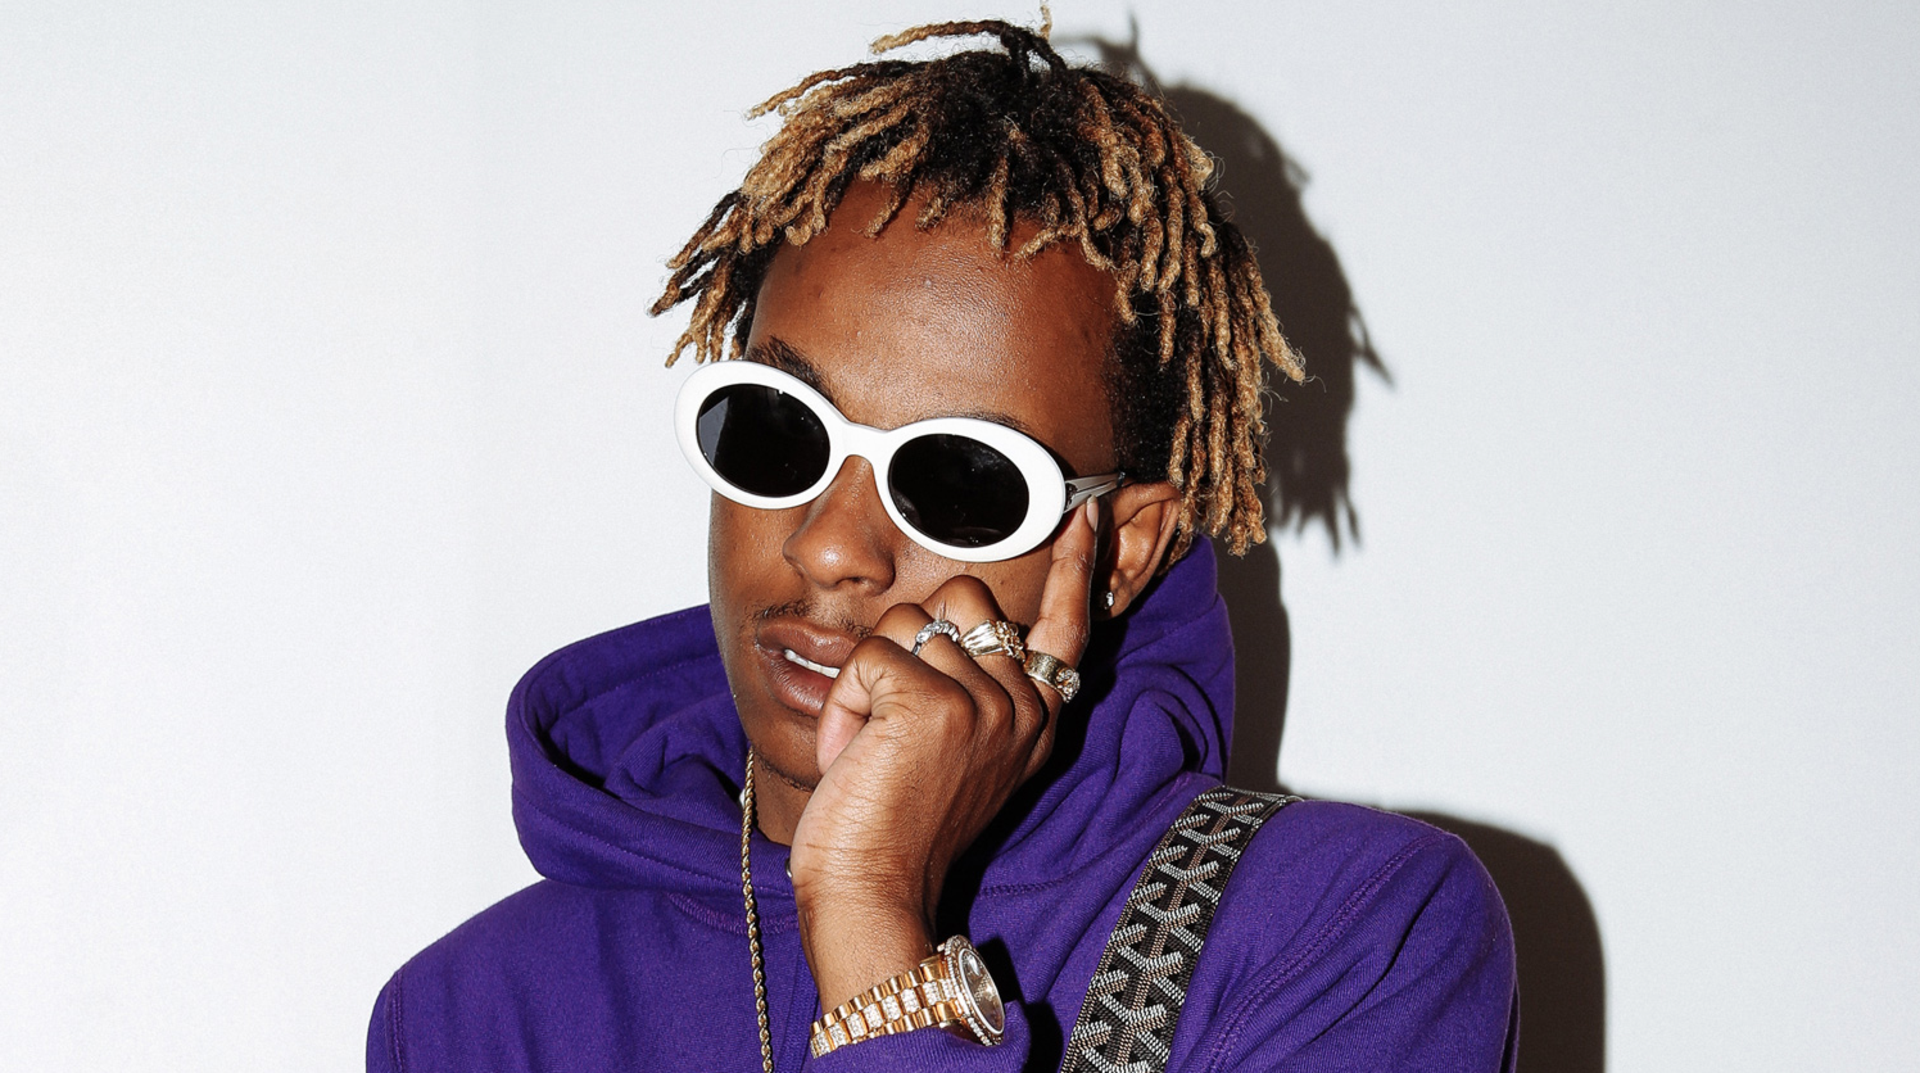 Playboi Carti Rich The Kid Lil Yachty , HD Wallpaper & Backgrounds